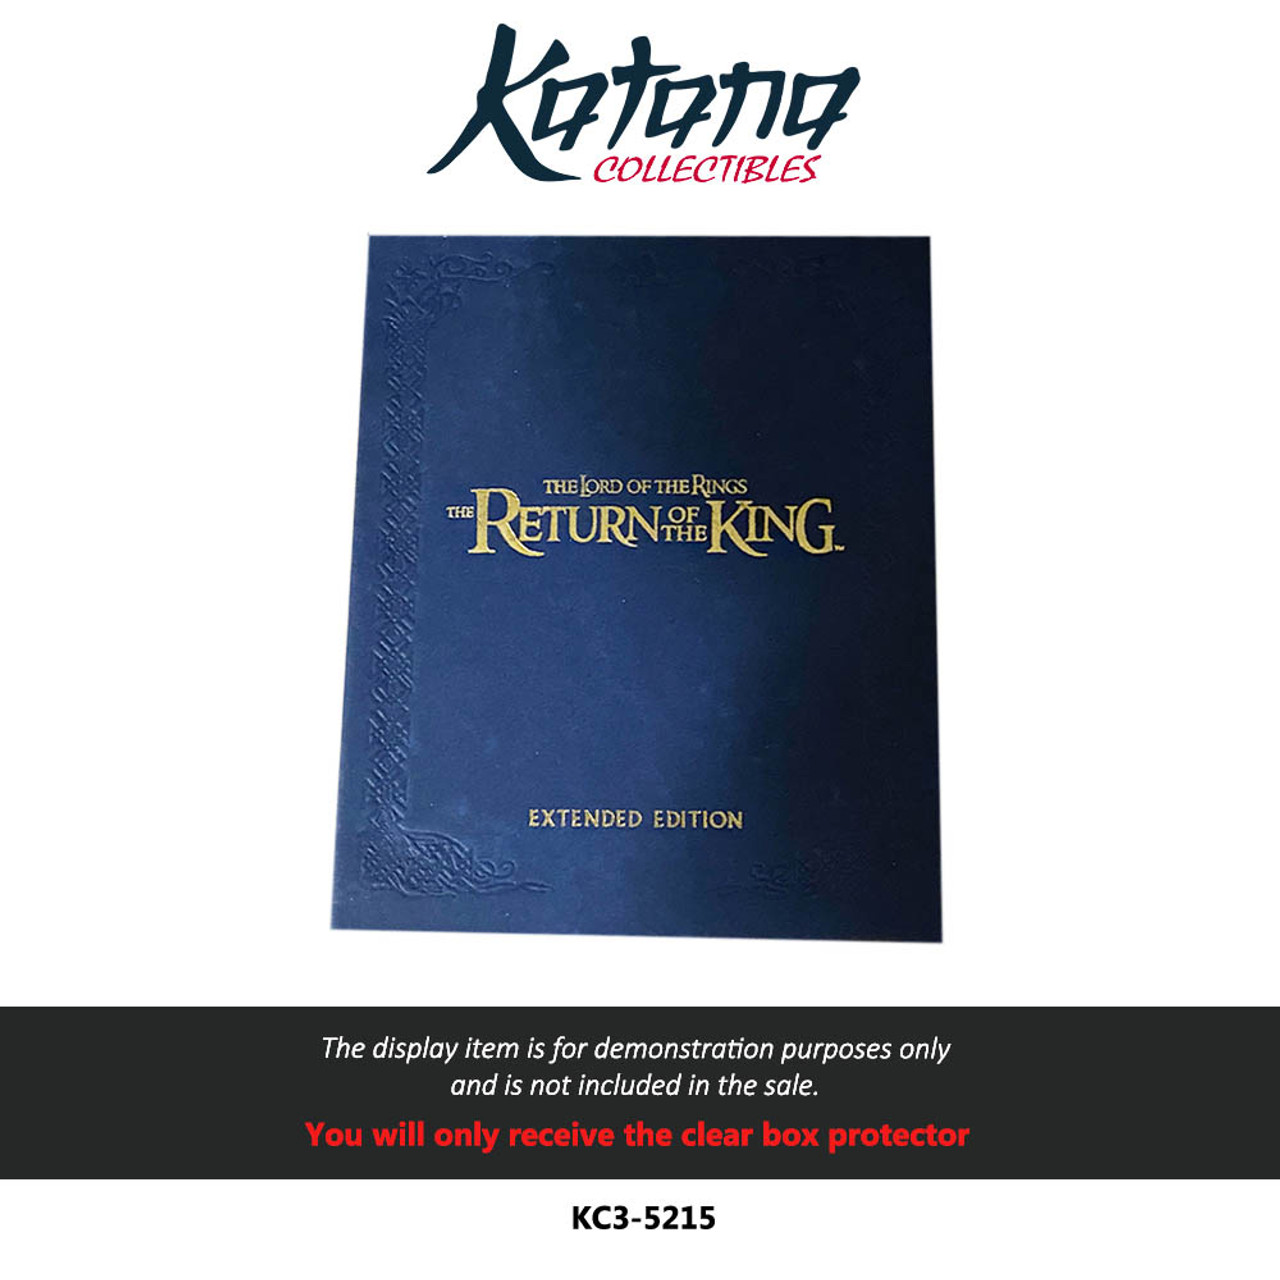 Katana Collectibles Protector For LOTR Return Of The King 4K Steelbook HDZETA Gold Extended Edition + Book